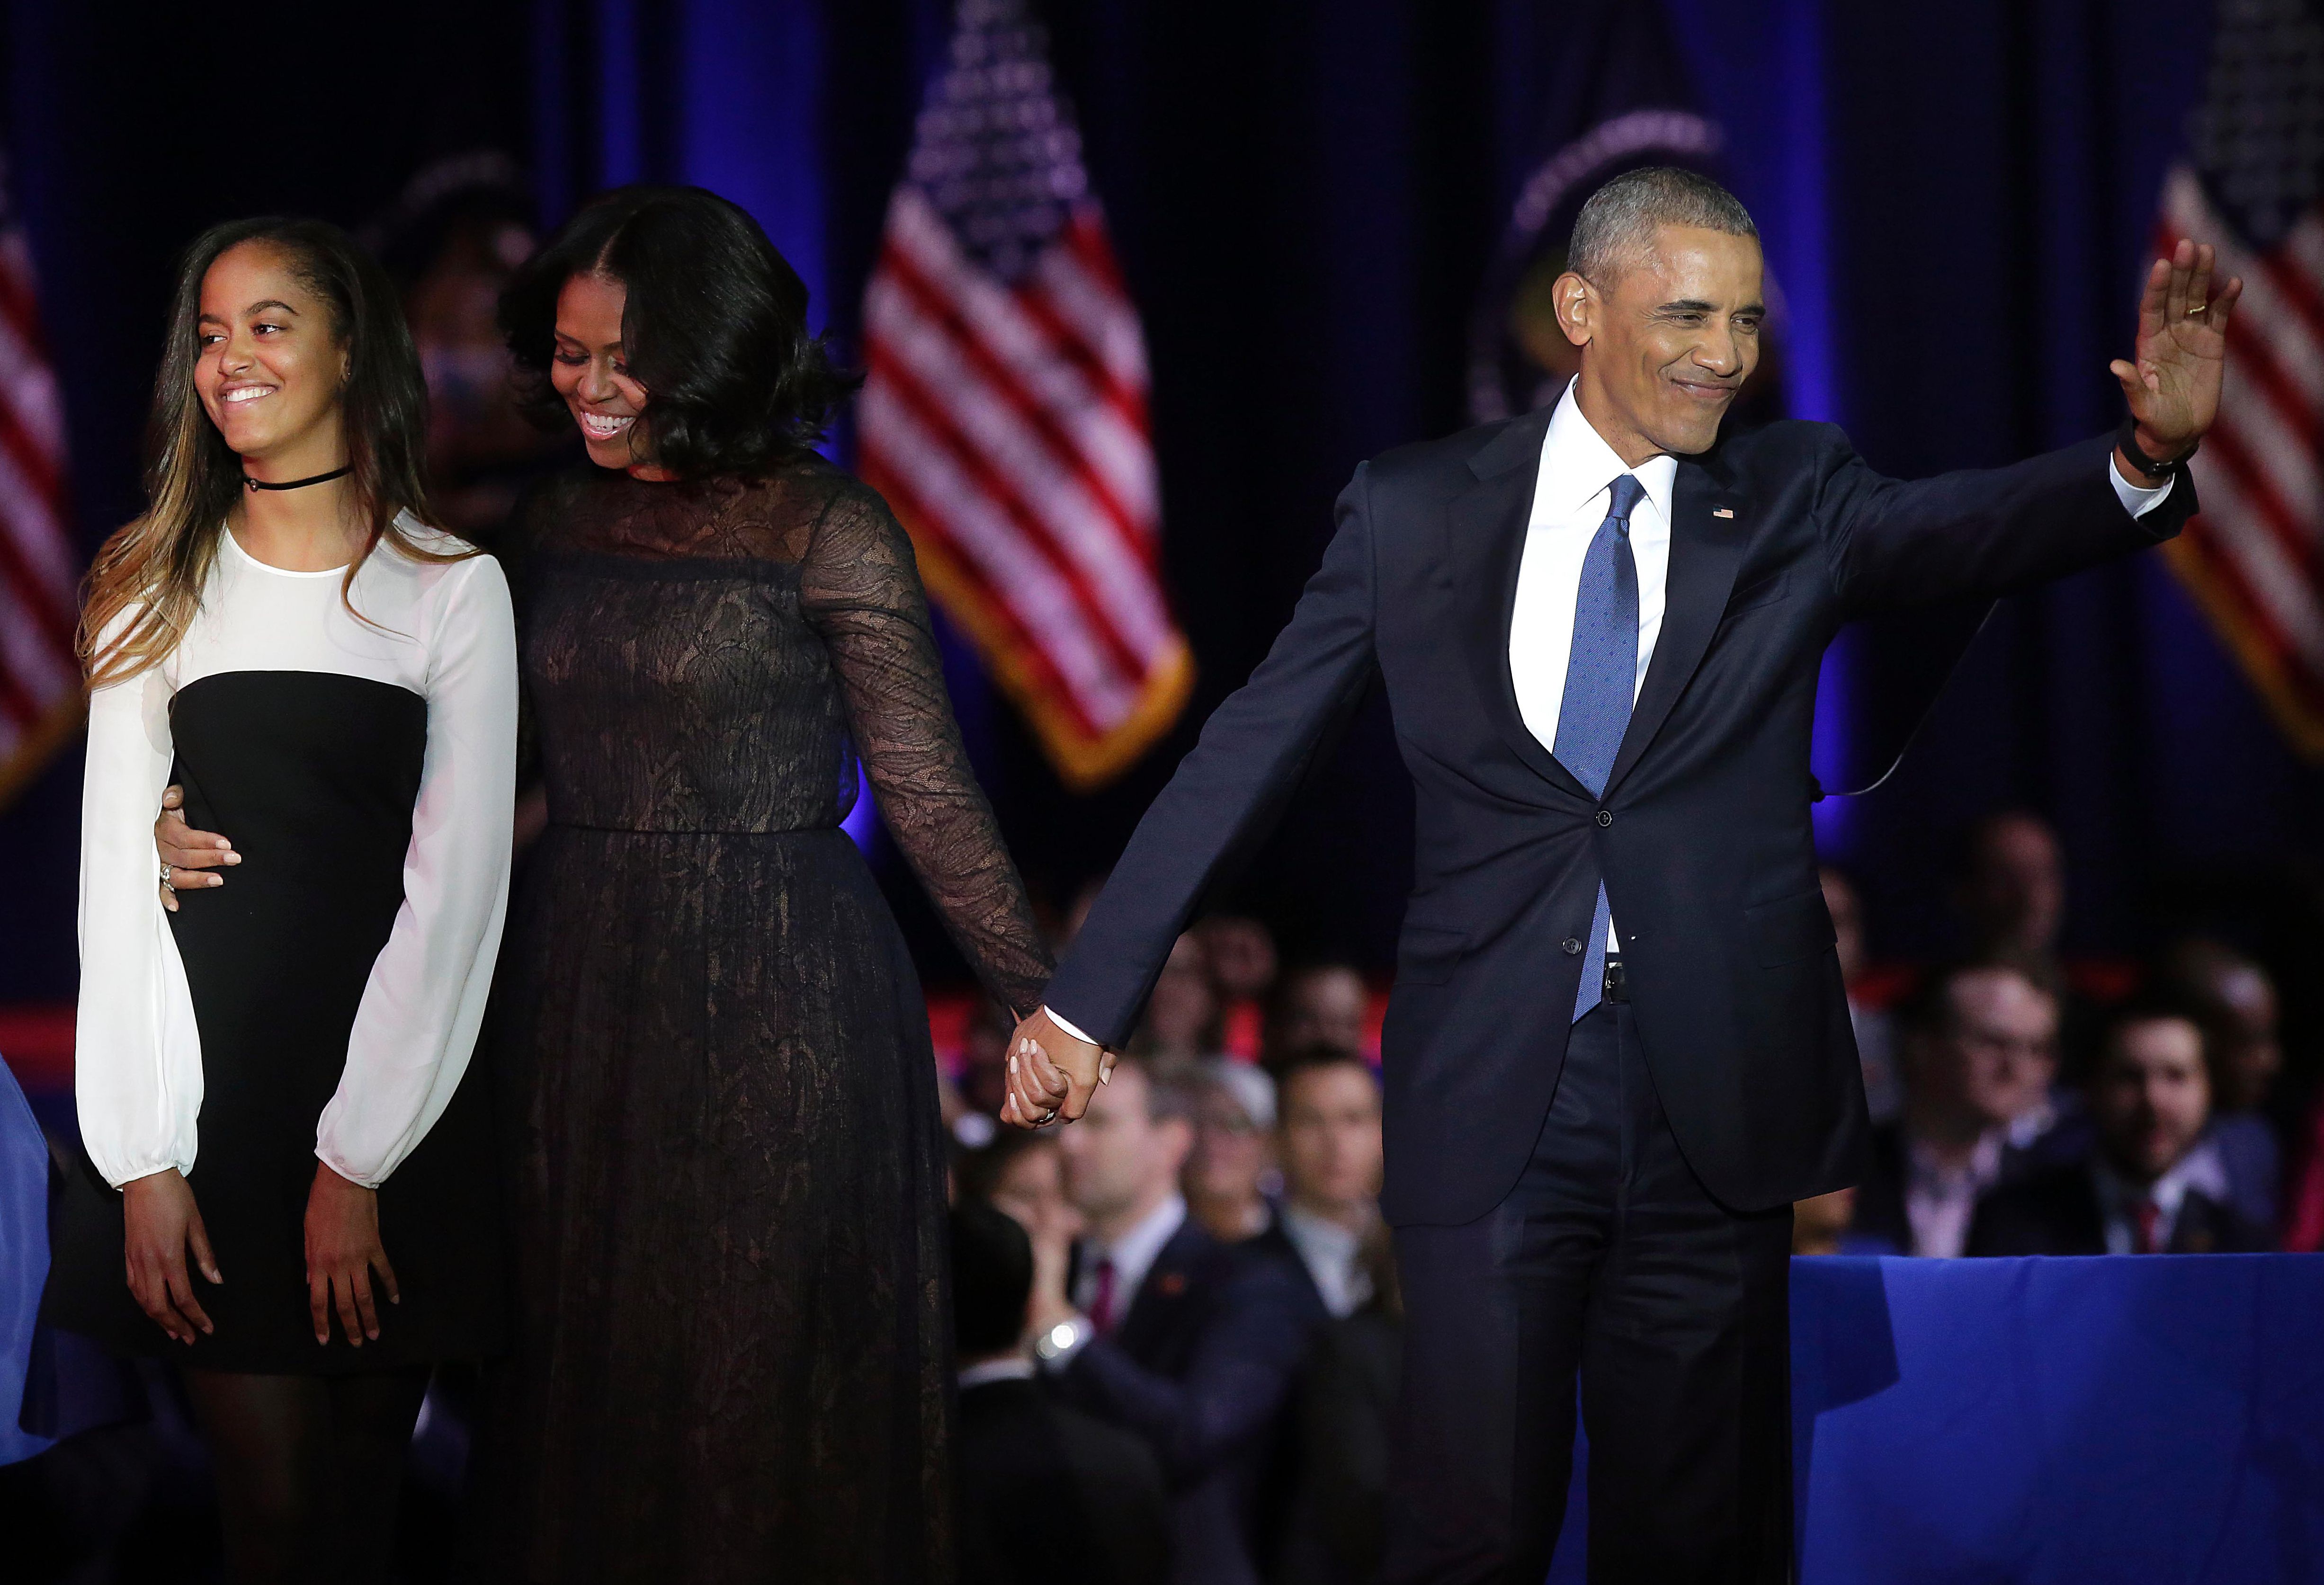 Malia, Michelle and Barack Obama at former President Barack Obama's farewell address to the American people in Chicago, Illinois on January 10, 2017 | Source: Getty Images